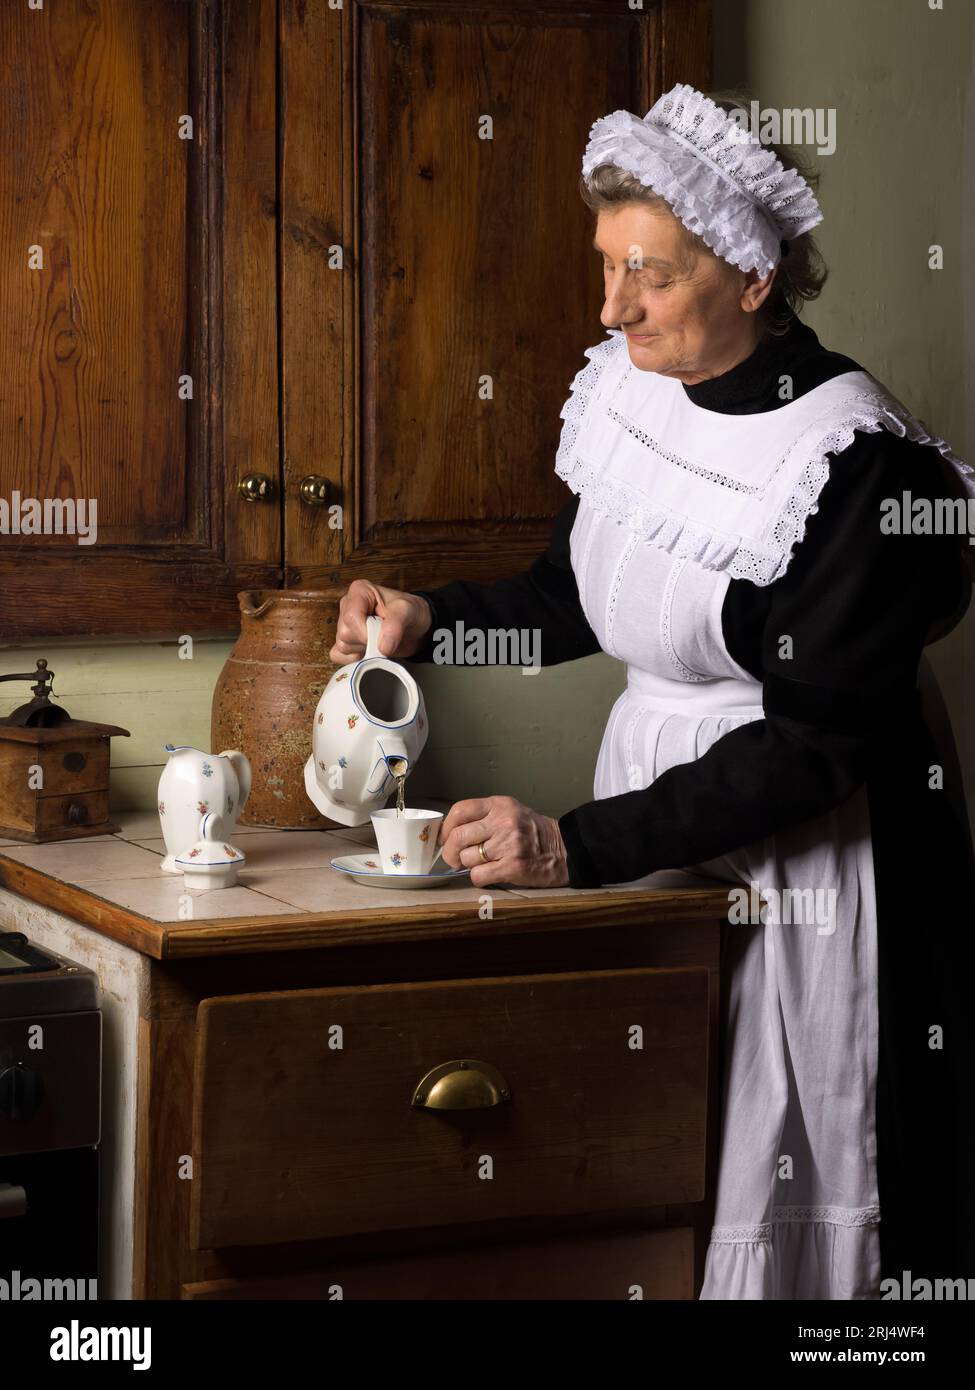 https://c8.alamy.com/comp/2RJ4WF4/victorian-maid-or-servant-in-black-dress-lace-cap-and-white-apron-working-in-a-19th-century-interior-2RJ4WF4.jpg